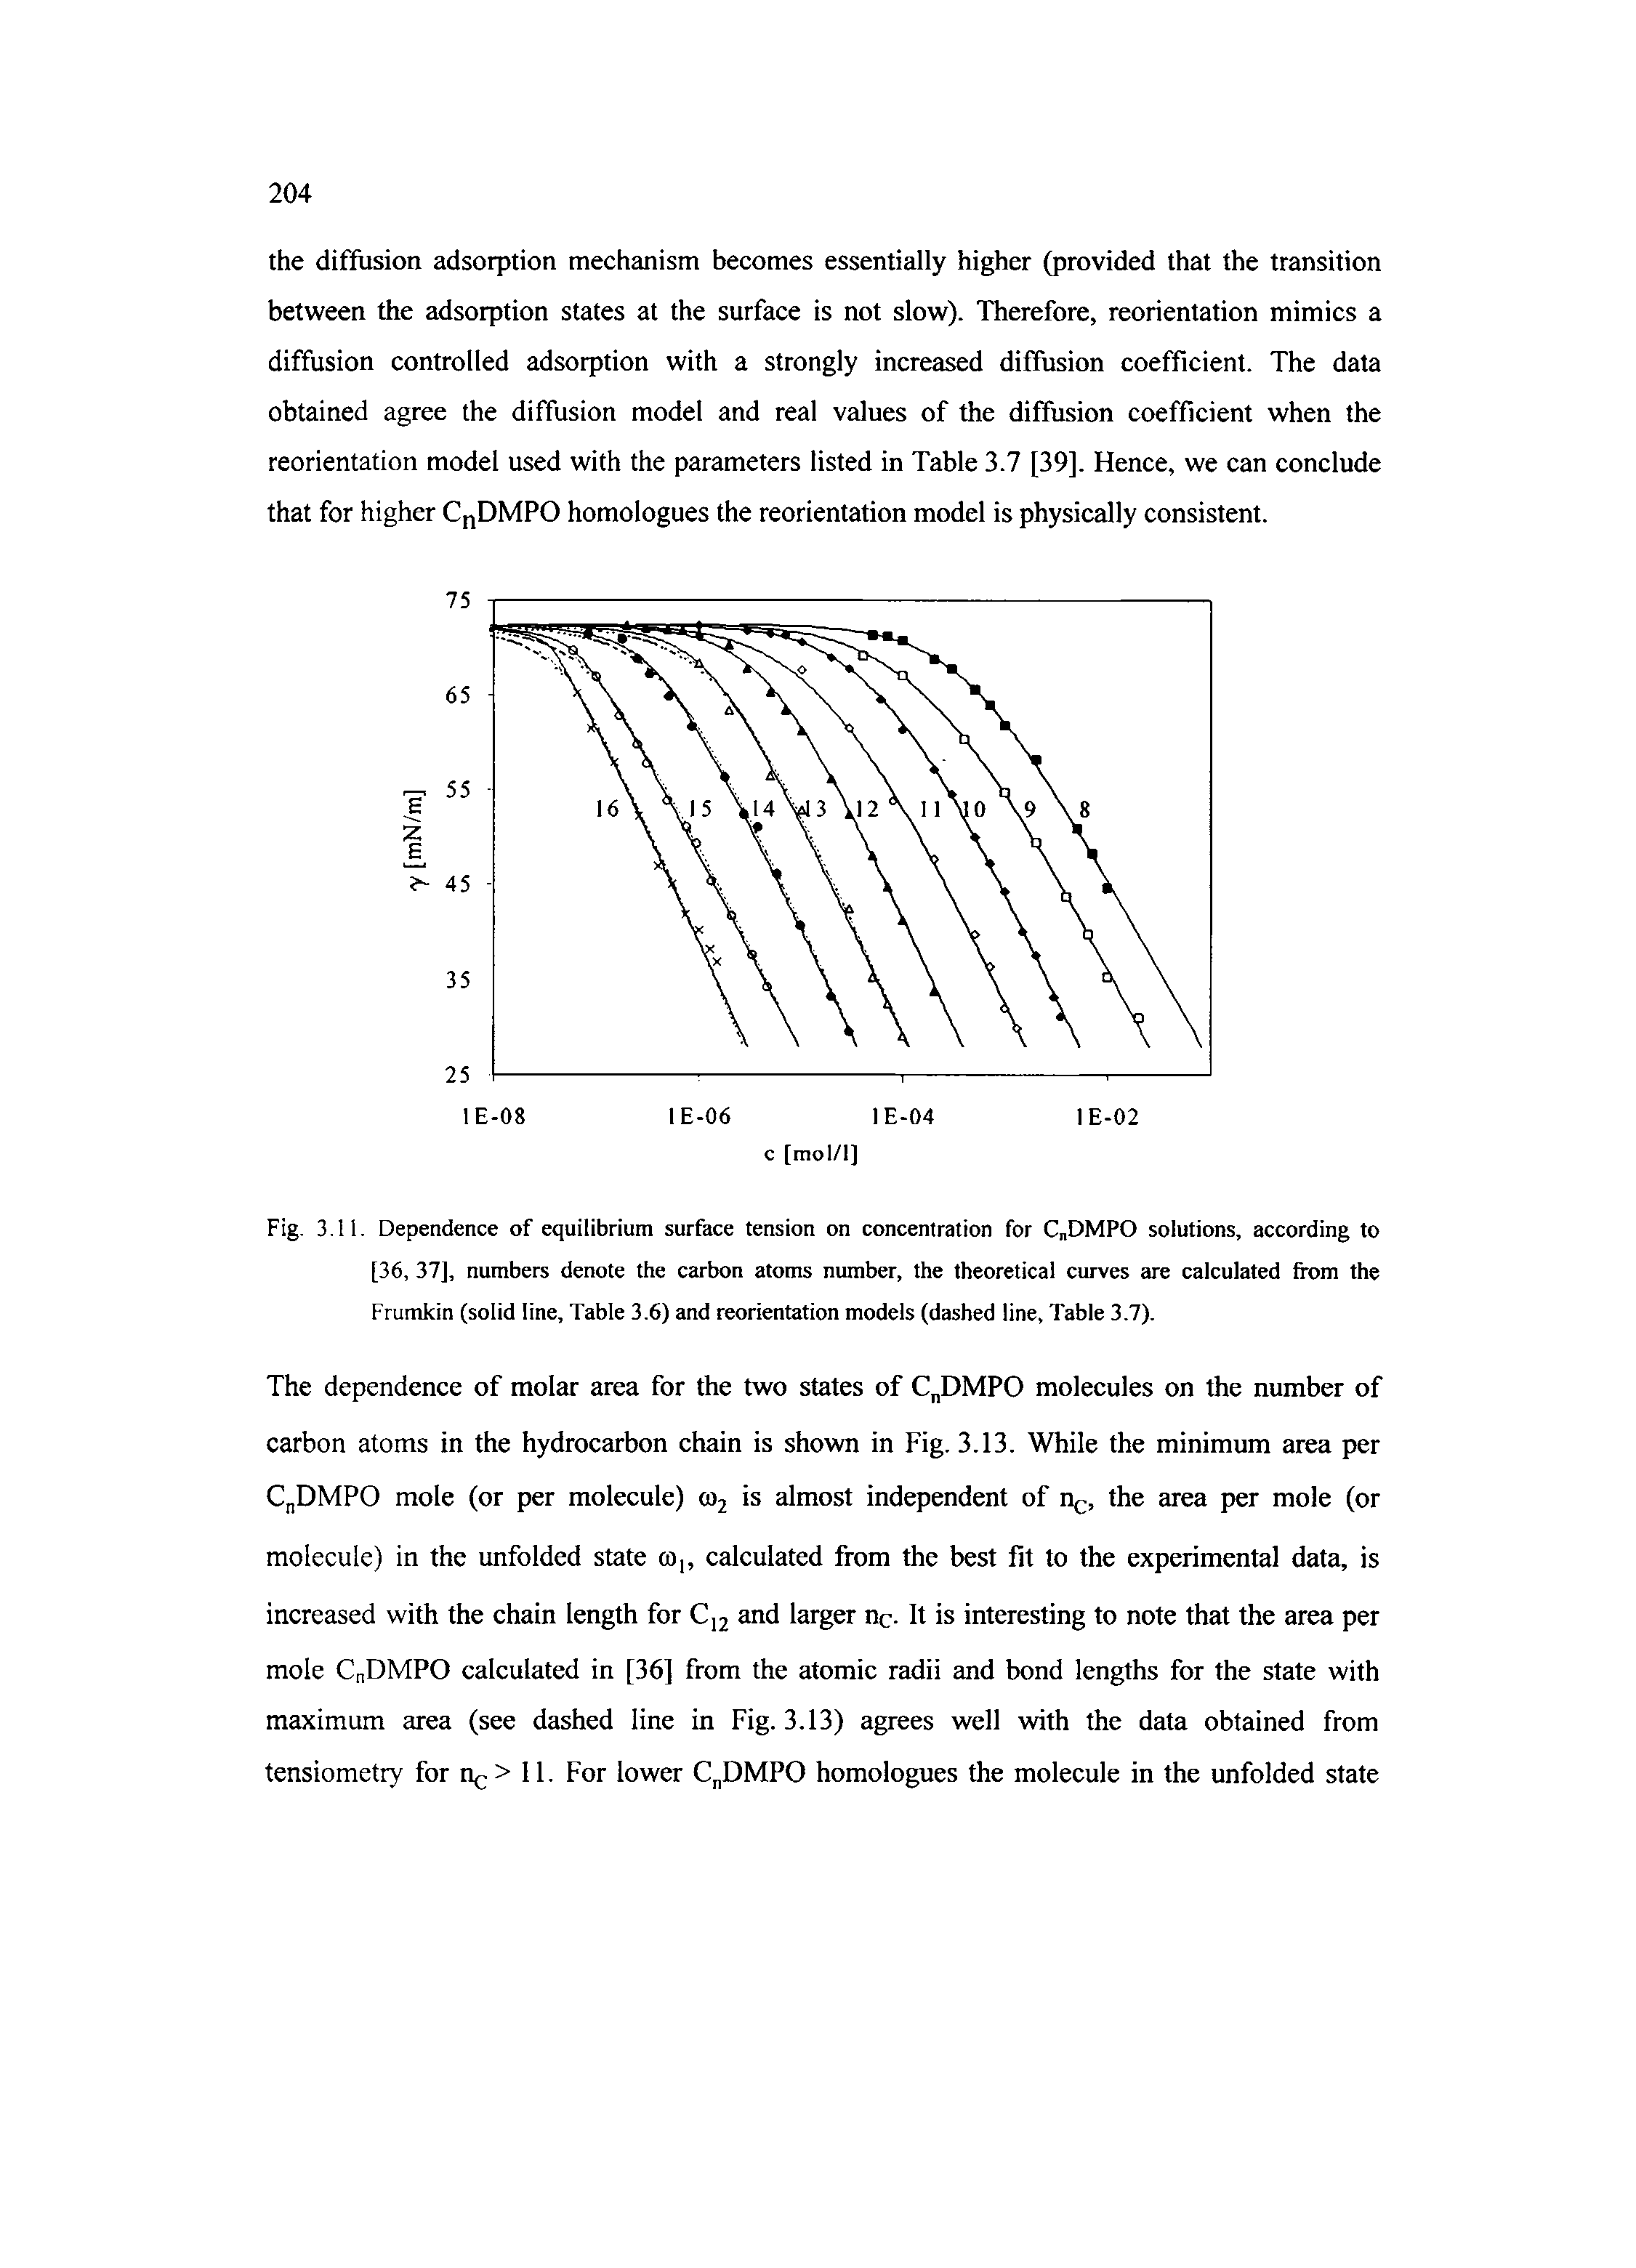 Fig. 3.11. Dependence of equilibrium surface tension on concentration for C DMPO solutions, according to [36, 37], numbers denote the carbon atoms number, the theoretical curves are calculated from the Frumkin (solid line. Table 3.6) and reorientation models (dashed line. Table 3.7).